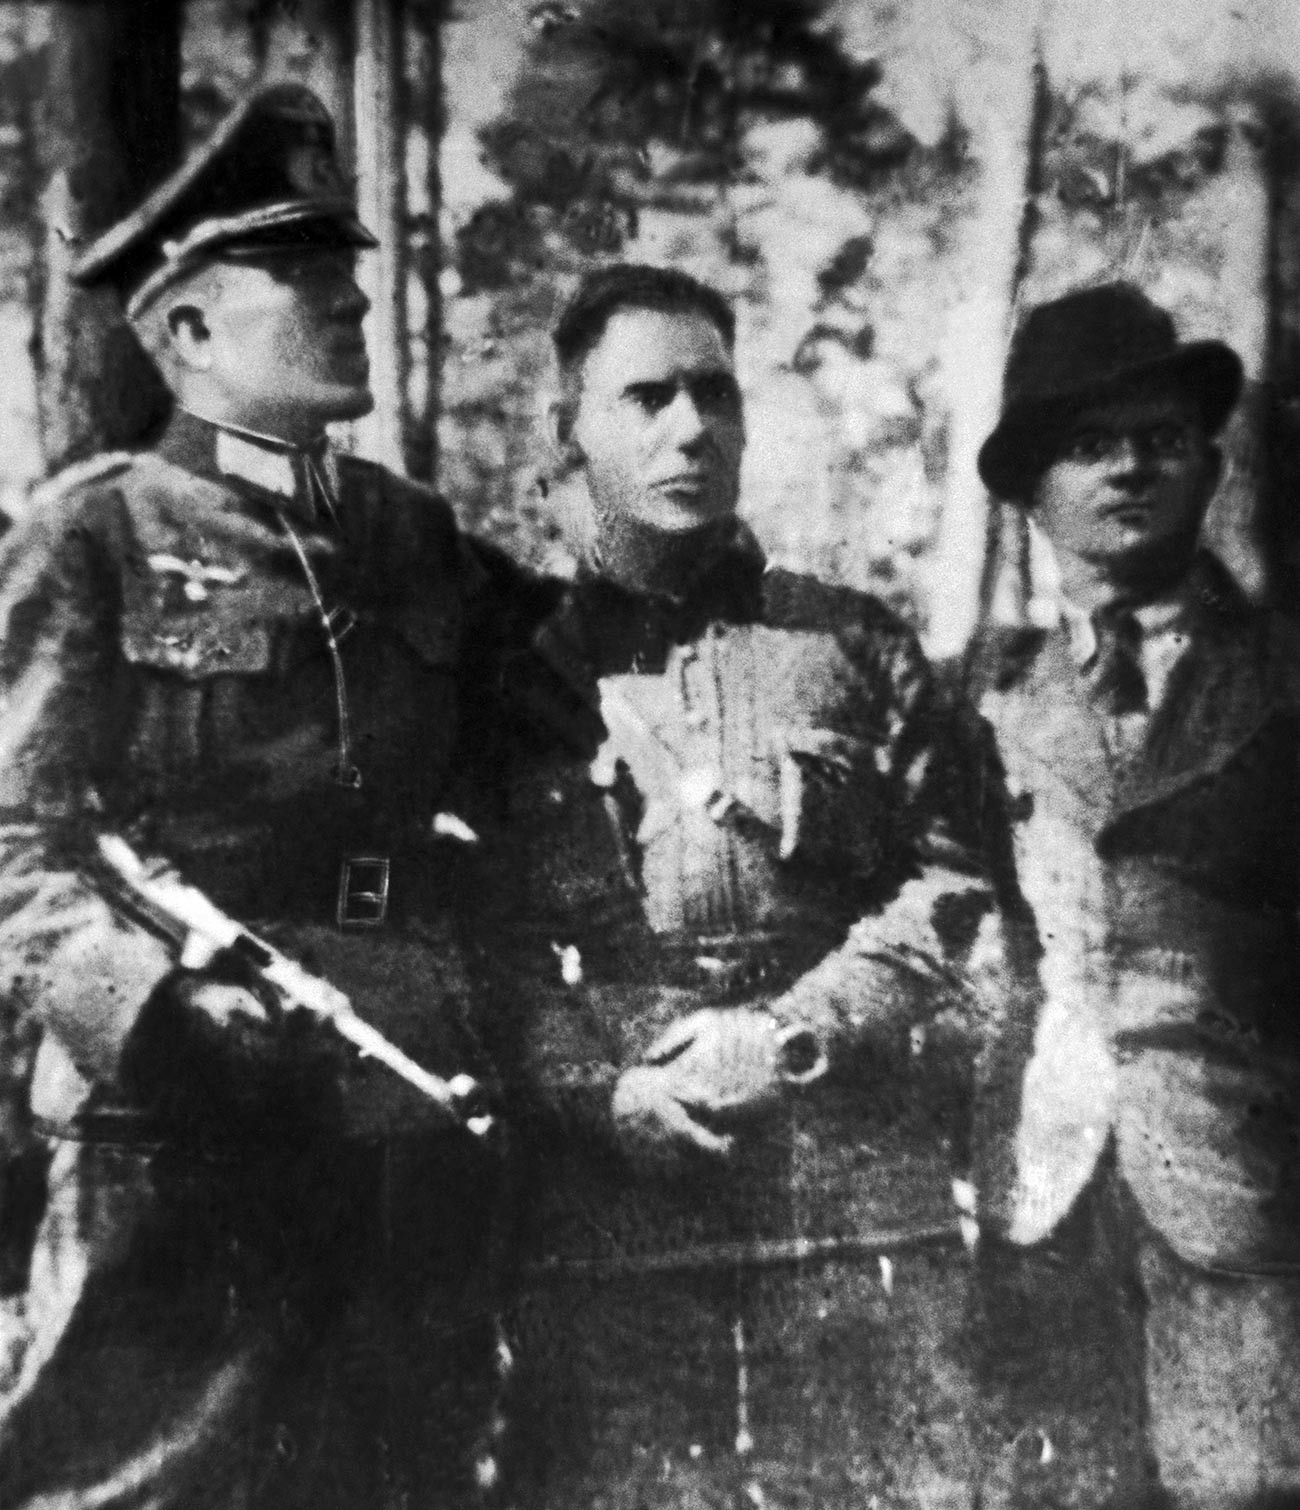 Nikolai Kuznetsov in the uniform of a German officer (left) with commissar of a partisan detachment Stekhov and Gnidyuk.